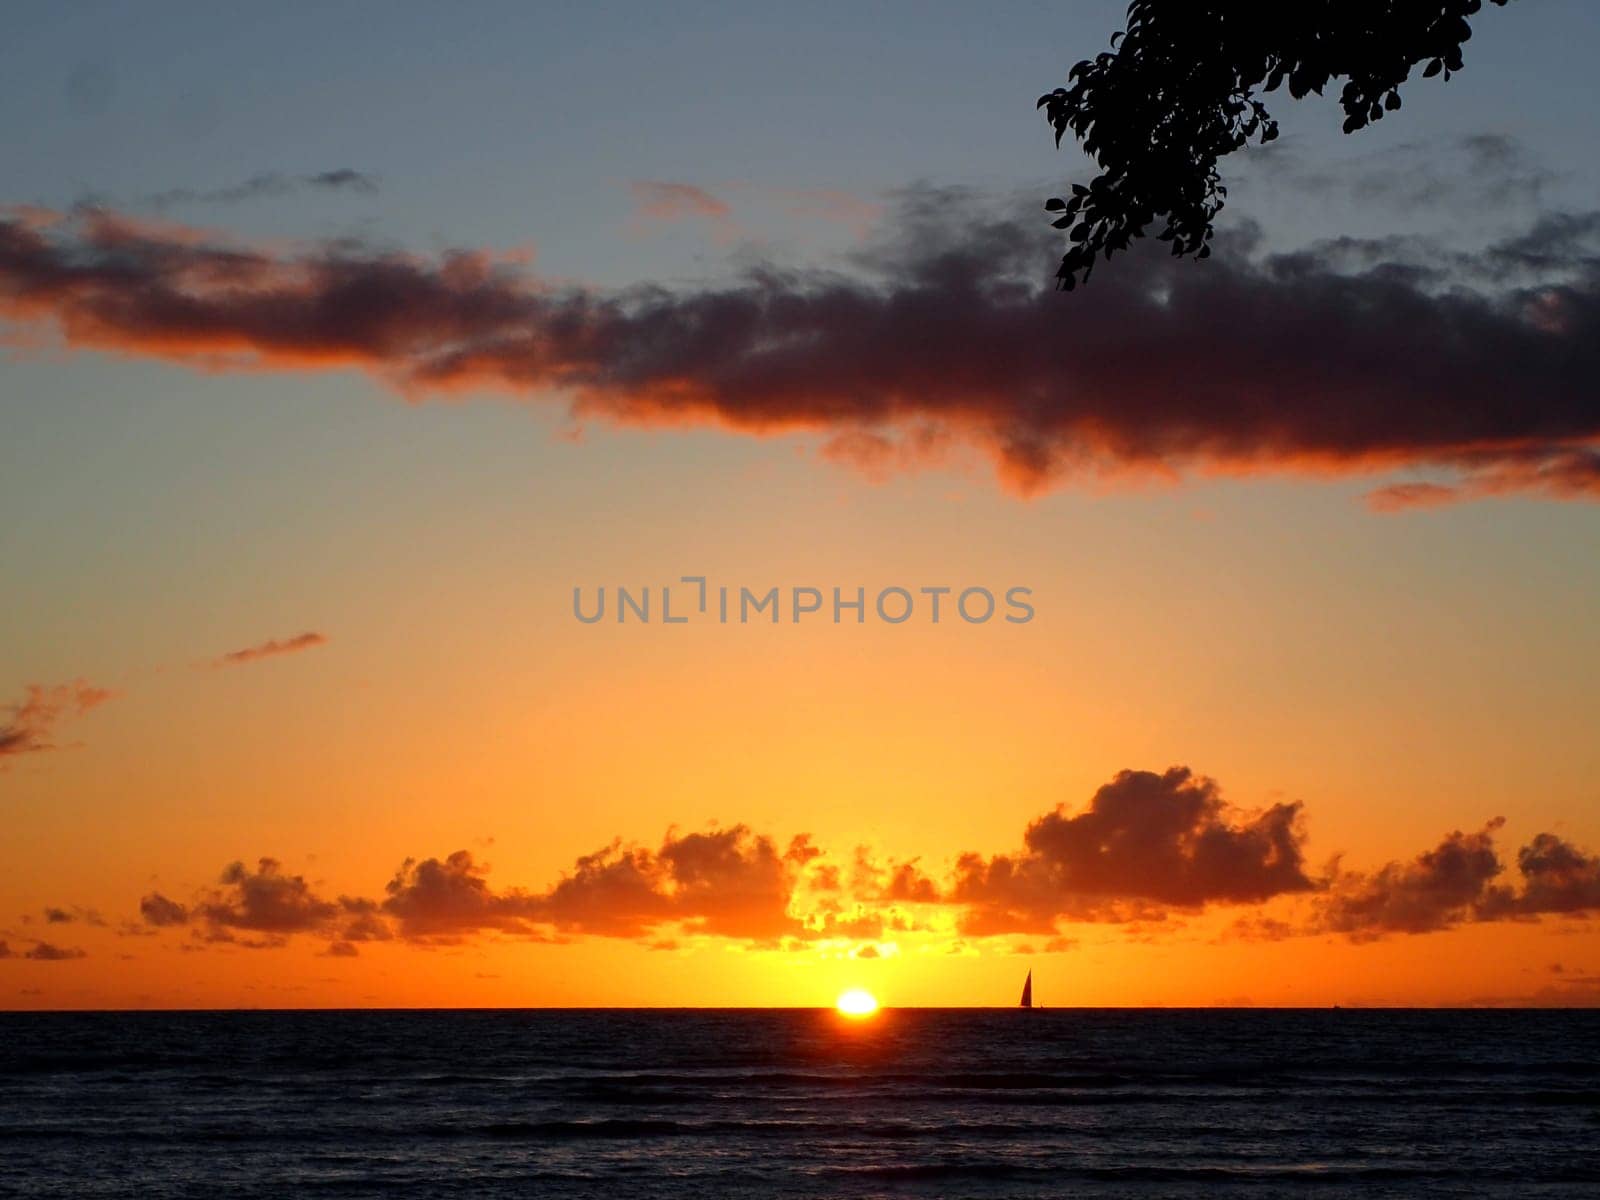 A stunning photo of a sailboat on the horizon at Waikiki sunset. The photo shows the sun partially hidden by the clouds, creating a gradient of orange and yellow colors in the sky. The ocean is a dark blue with small waves, reflecting the light of the sun. The sailboat is a white dot on the horizon, adding a touch of adventure and romance to the scene. A tree is visible on the right side of the image, framing the view. The photo captures the beauty and the tranquility of Waikiki, Hawaii.